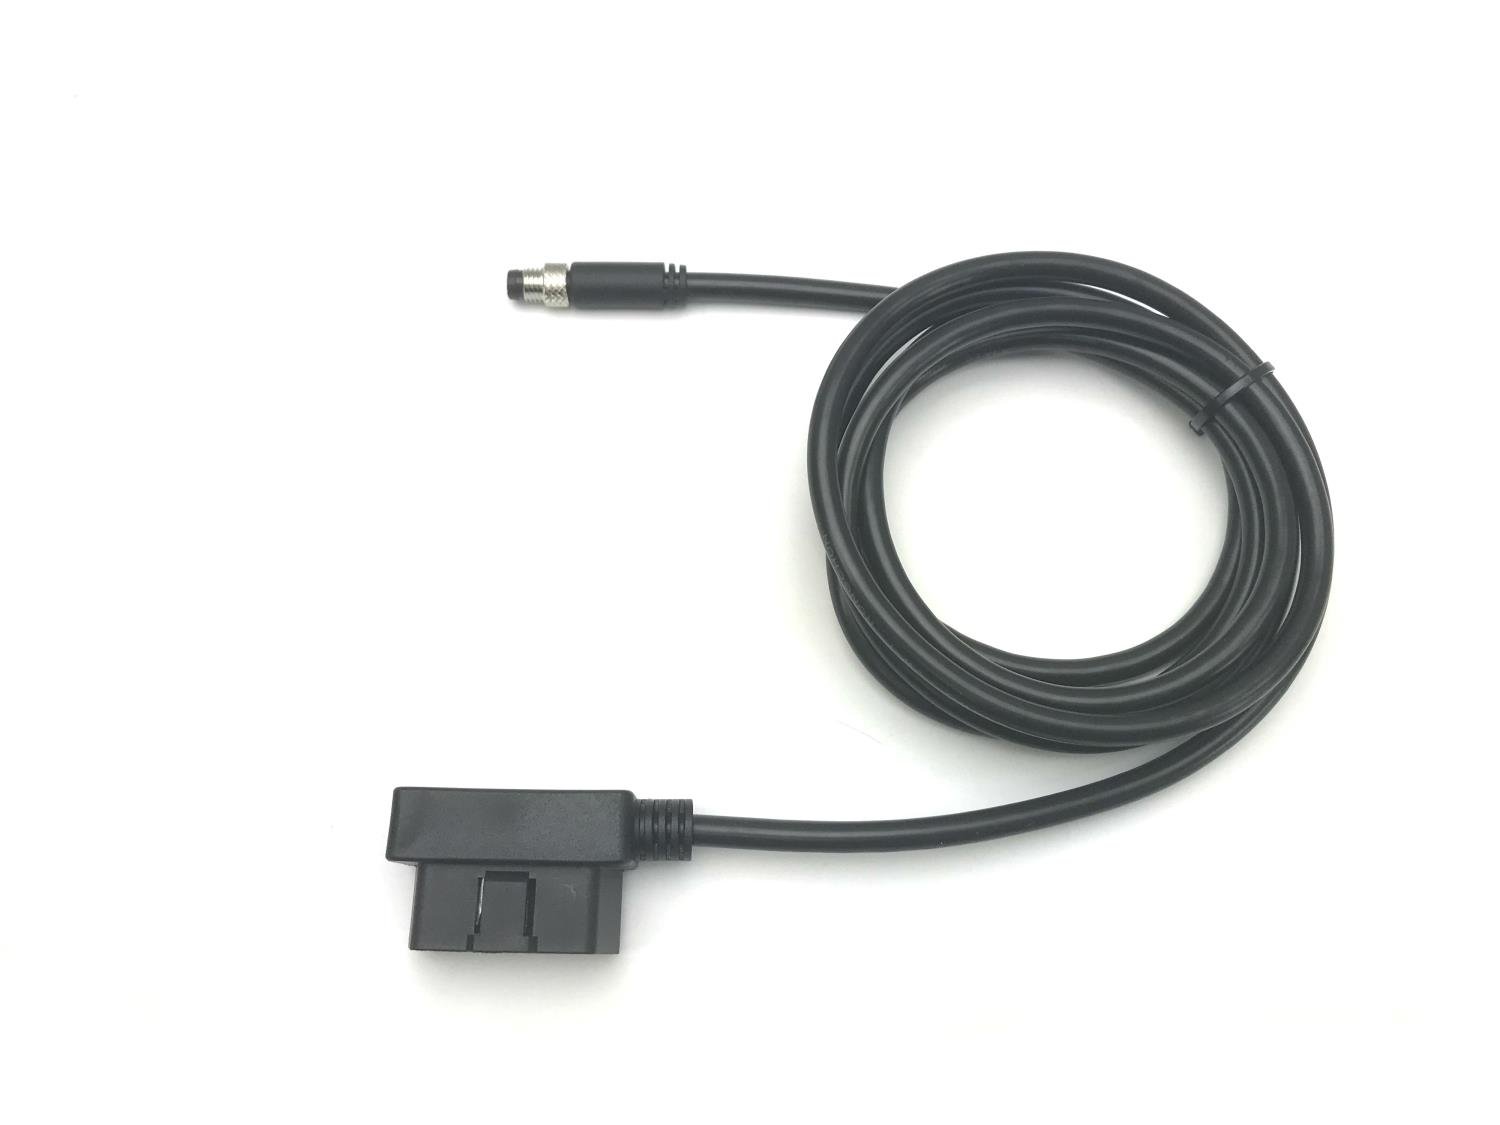 M8 OBDII Cable for Vantage CL1 Data Box